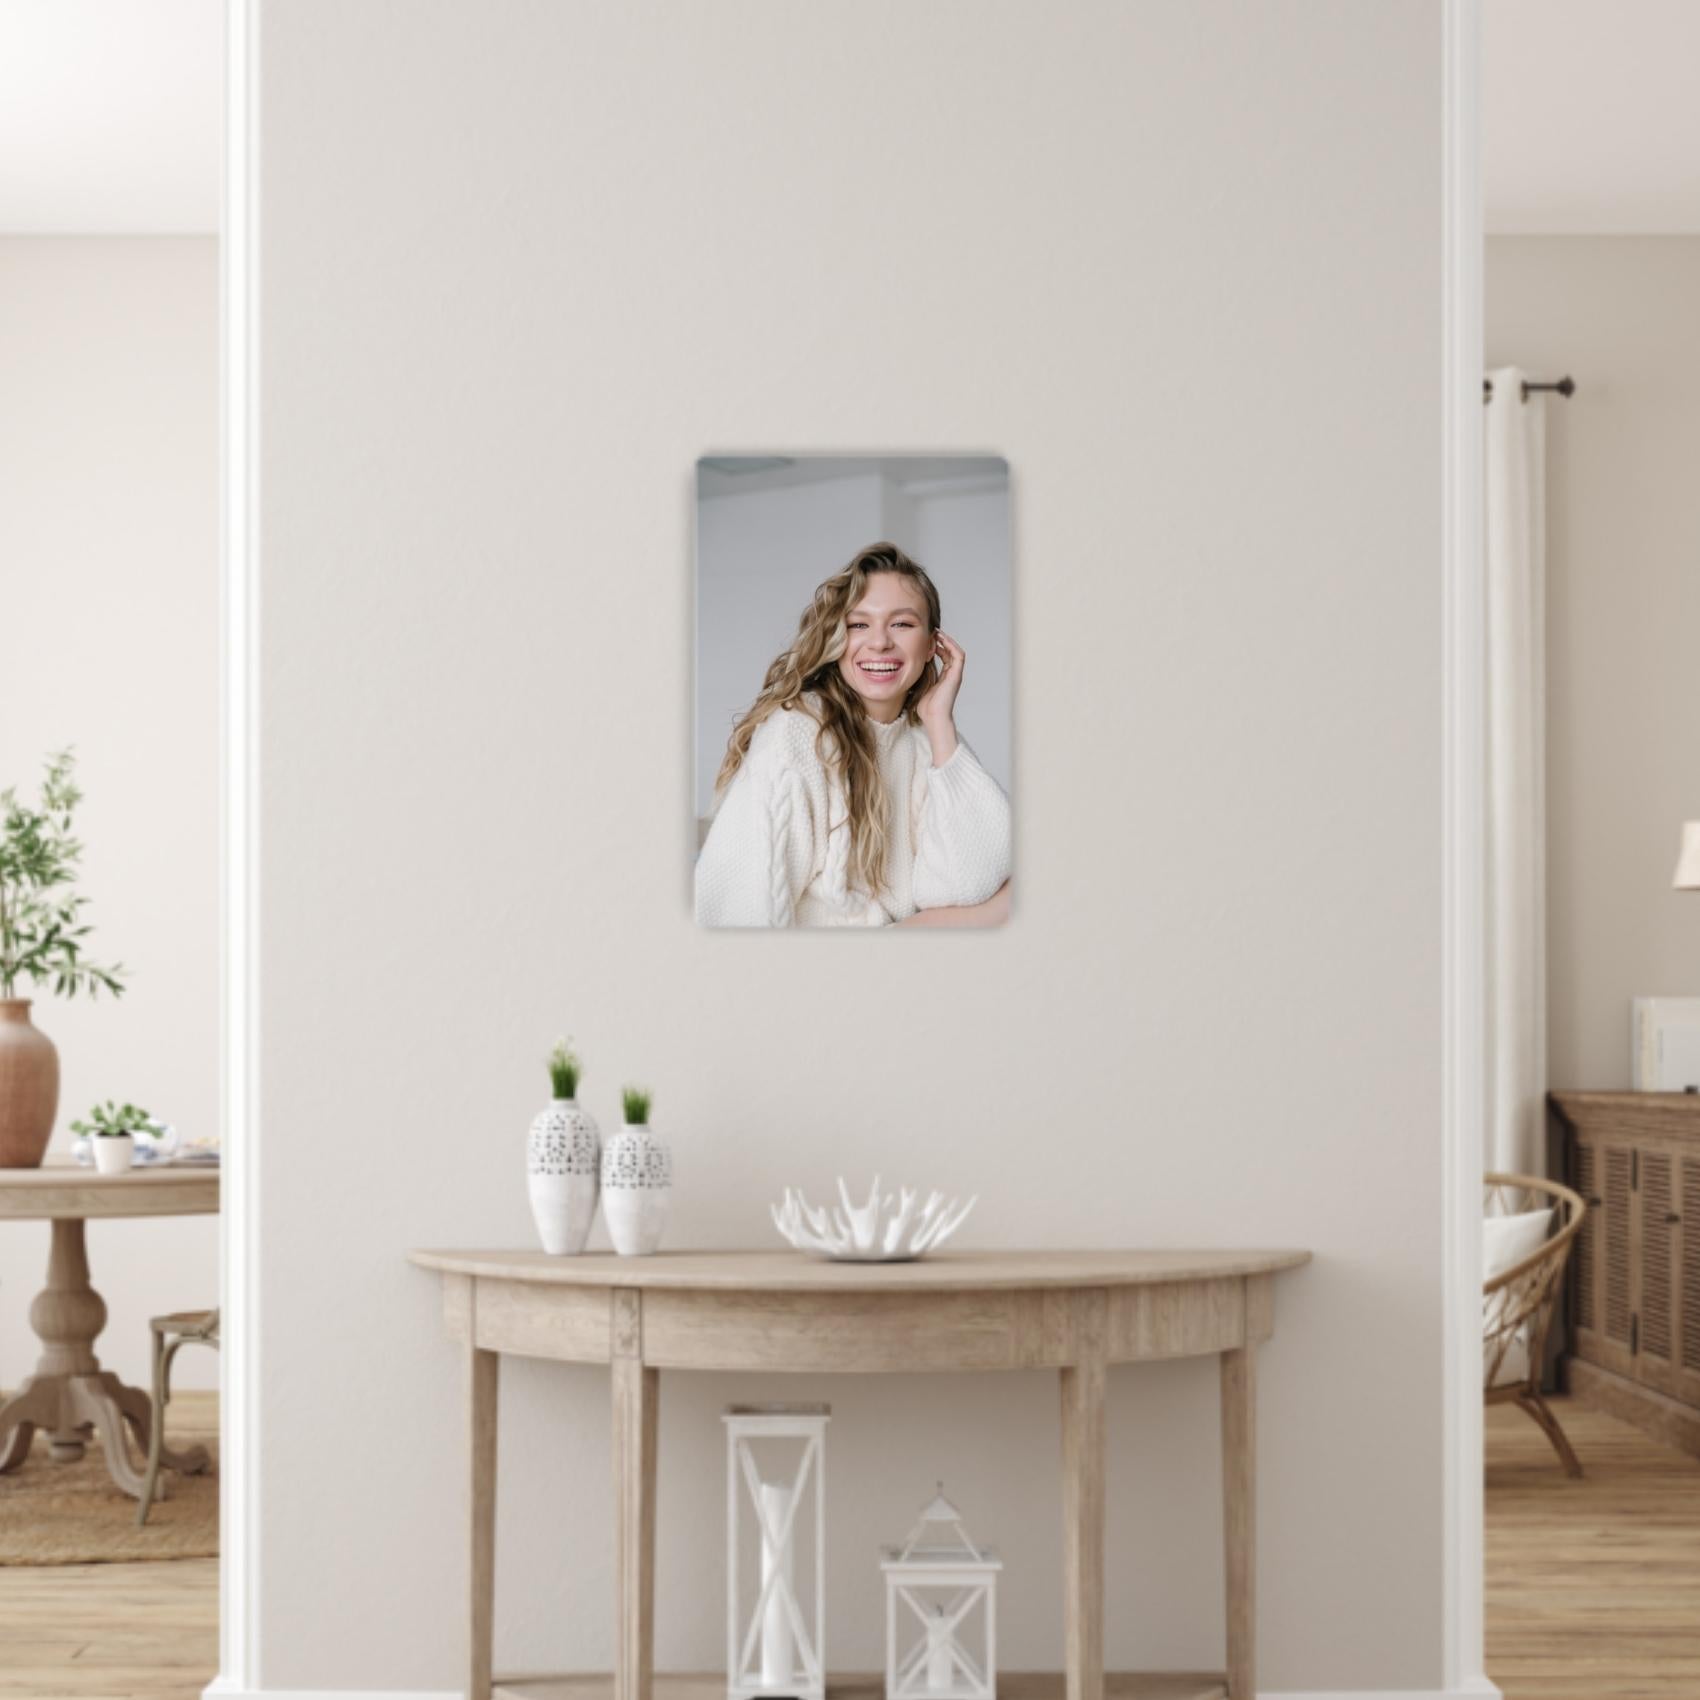 Personalized Acrylic Photo Frame Wall Hanger - A4 size